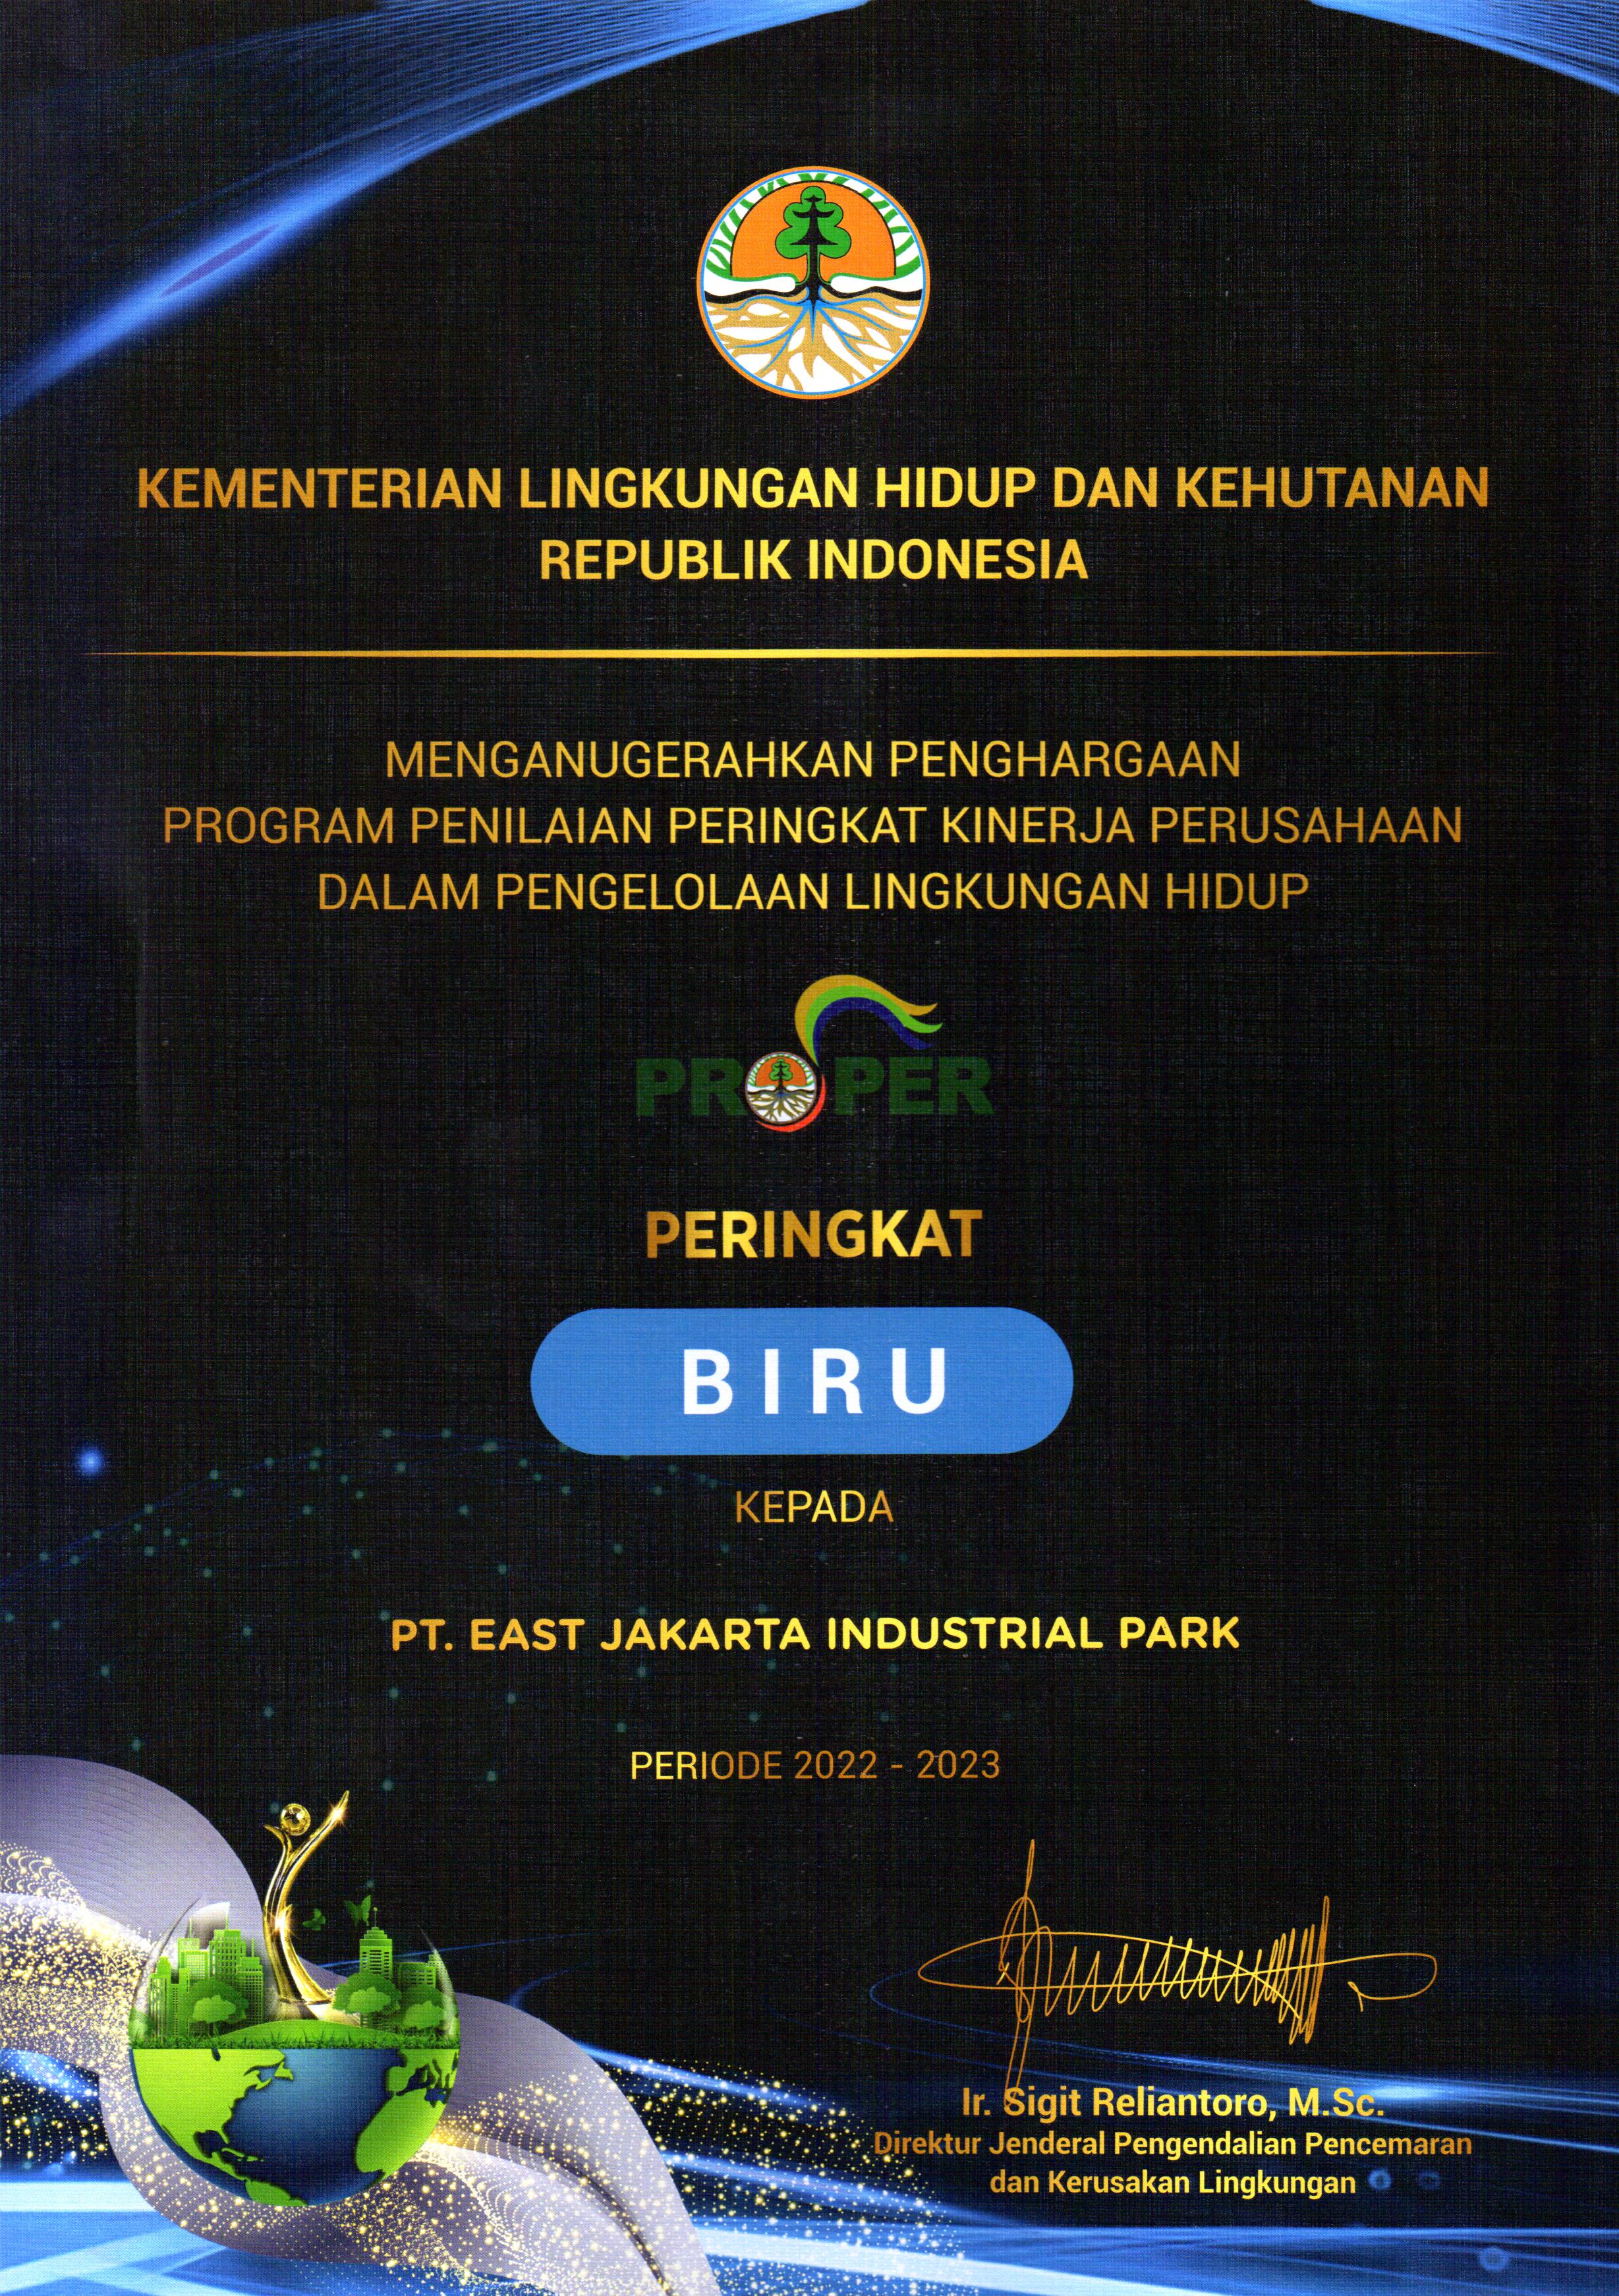 EJIP received Blue Ranking on Proper Certification